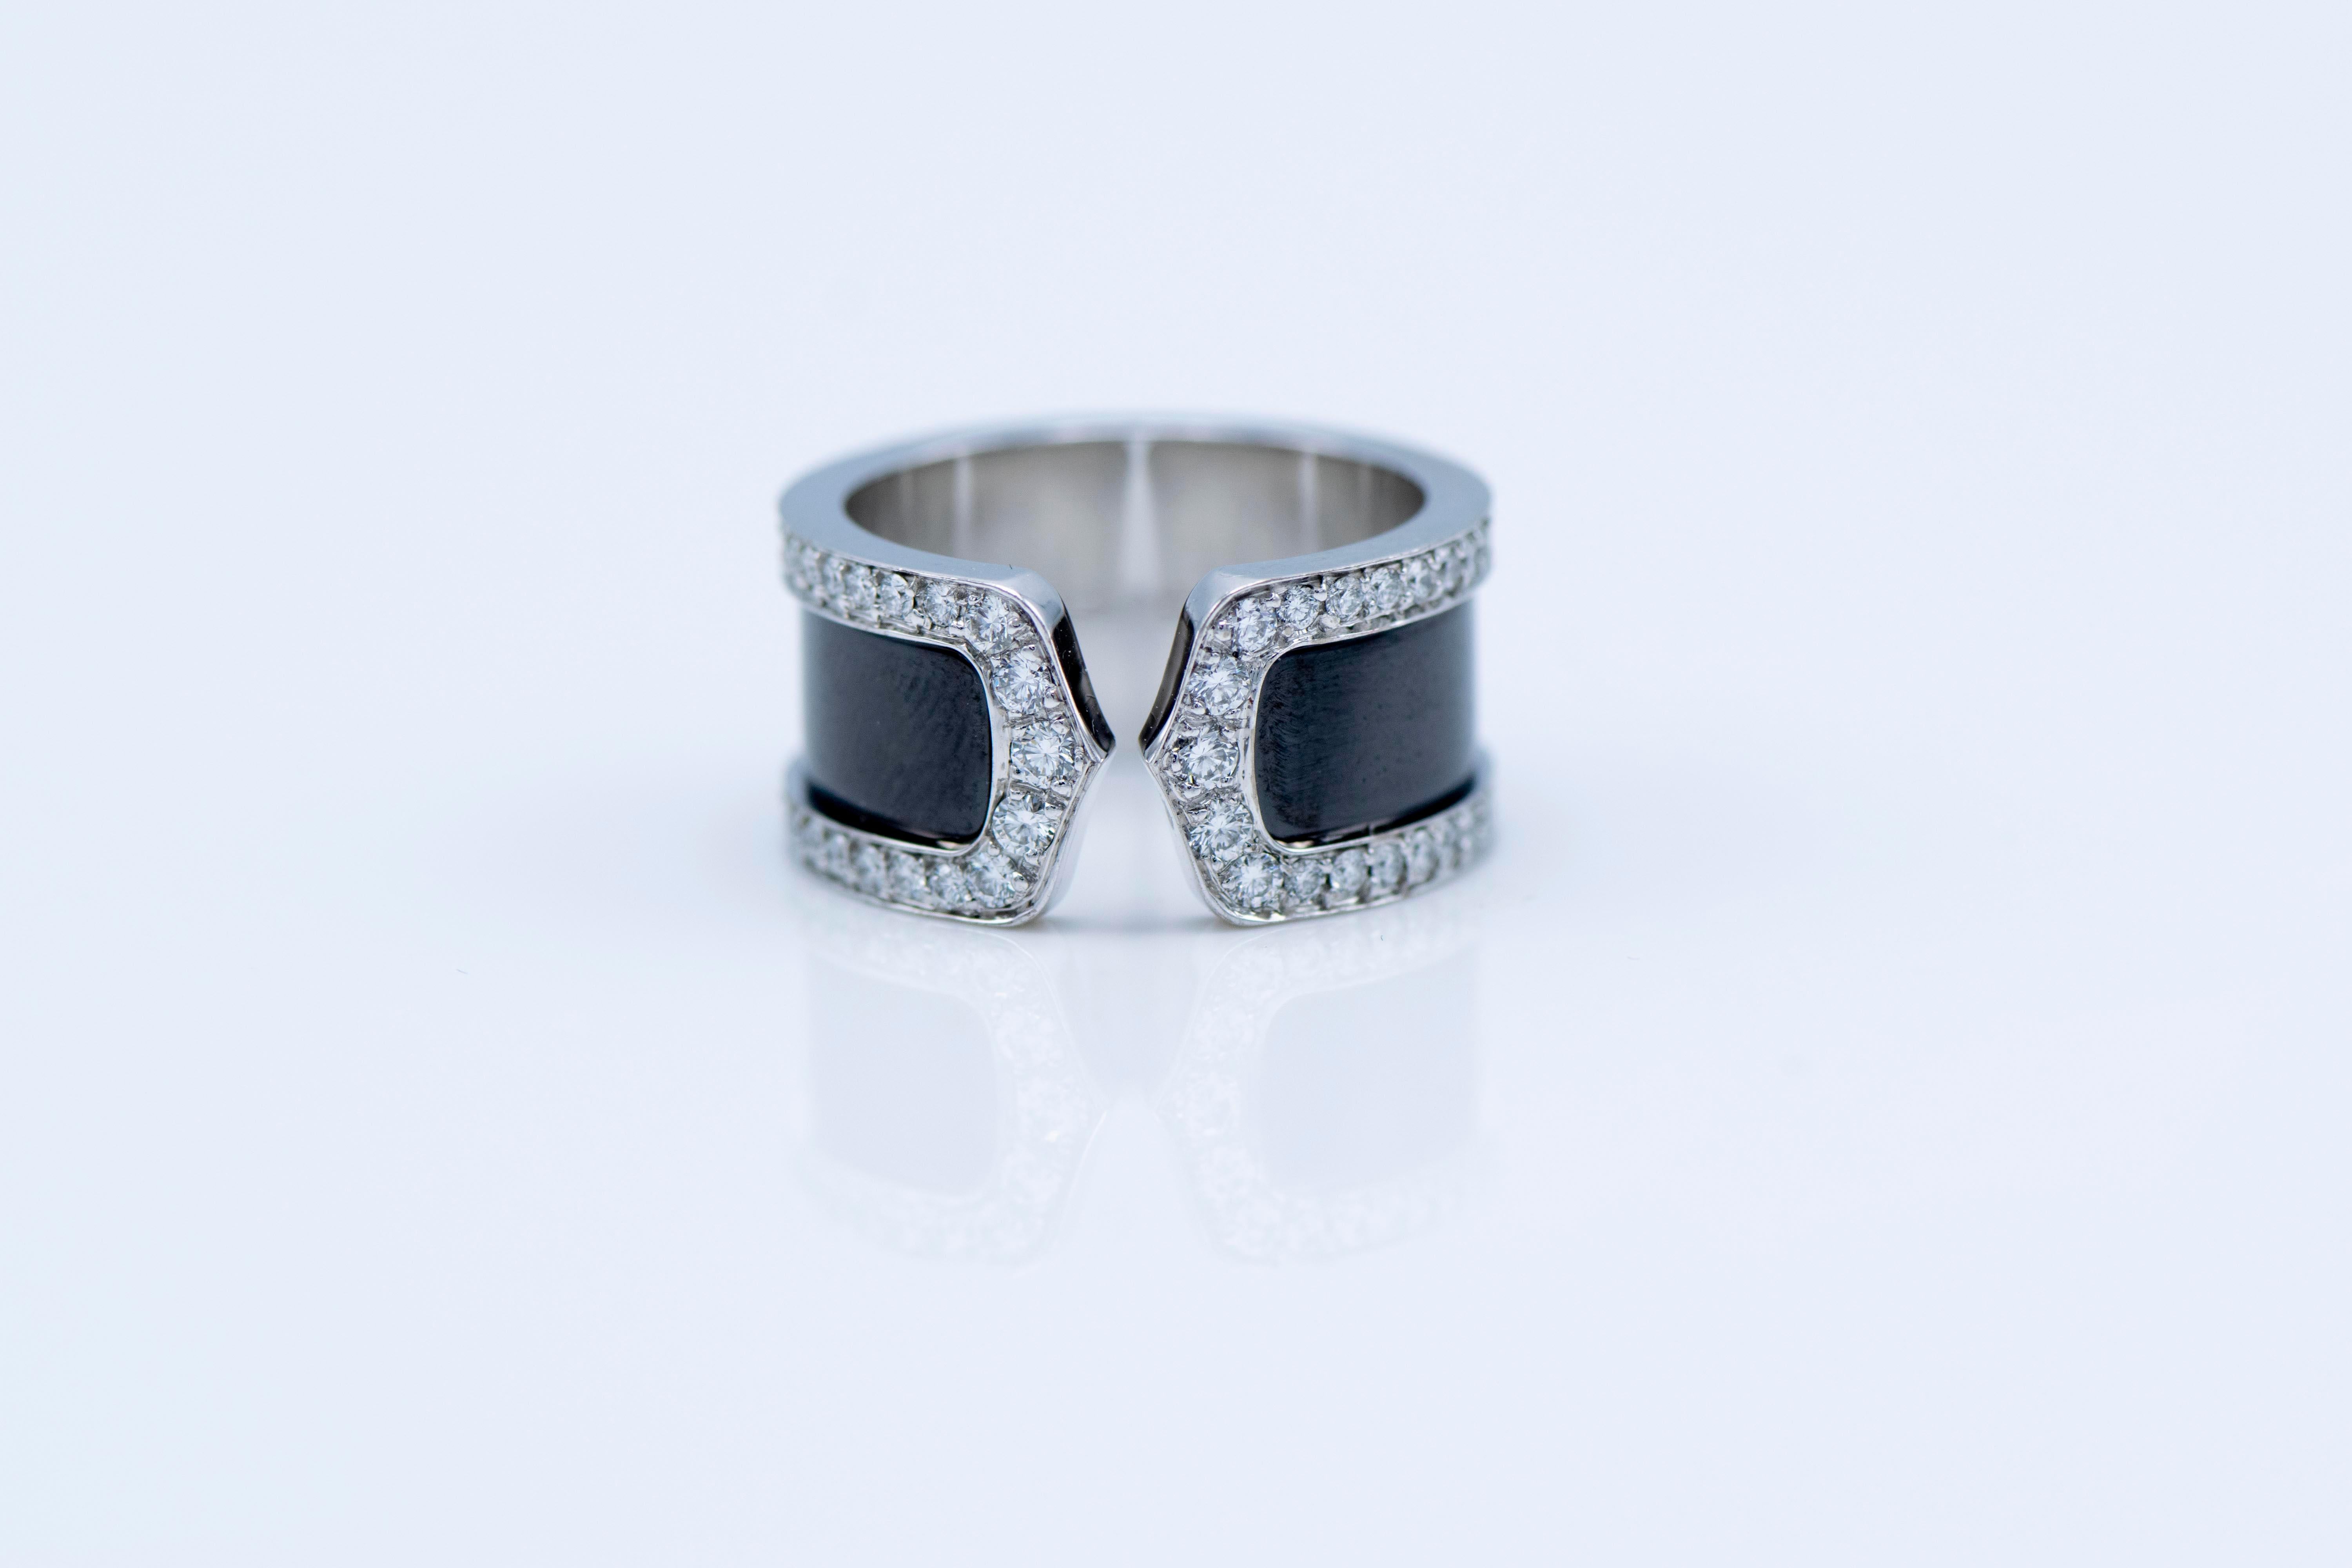 Cartier Diamond  open band “Double C” crafted in solid 18K white gold.It displays a double C open design with its band embellished with black finish enclosed within a frame of 76 genuine round cut Diamonds approx: 0.90cttw, E-F color, VVS clarity,